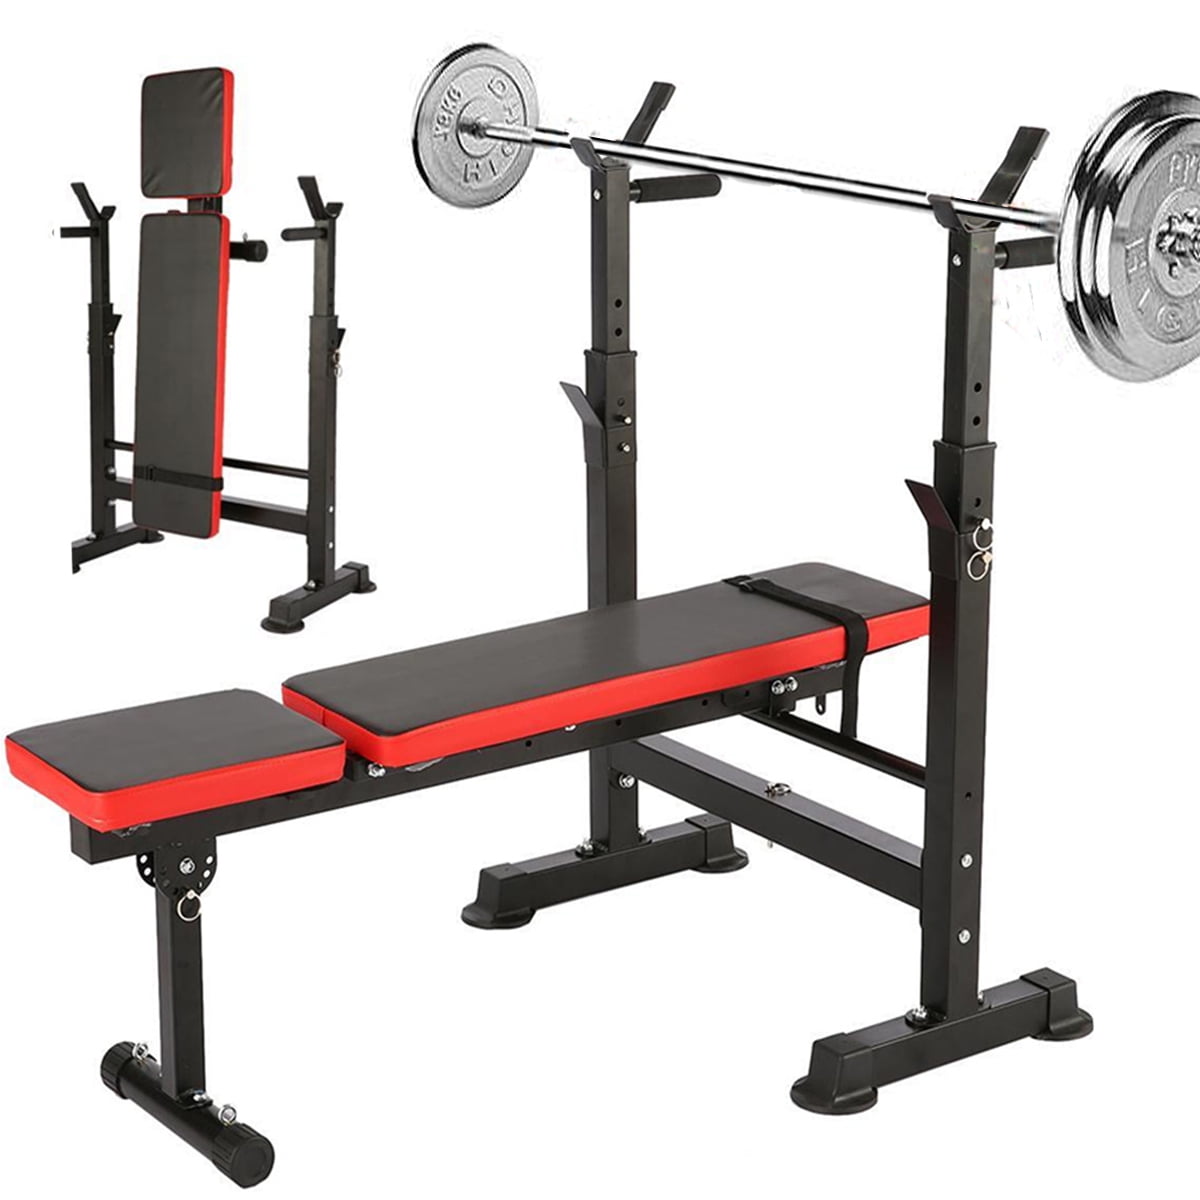 Adjustable Benches Weight Training Bench Folding Fitness Dip Station Equipment Lifting Chest Press Gym Exercise Indoor